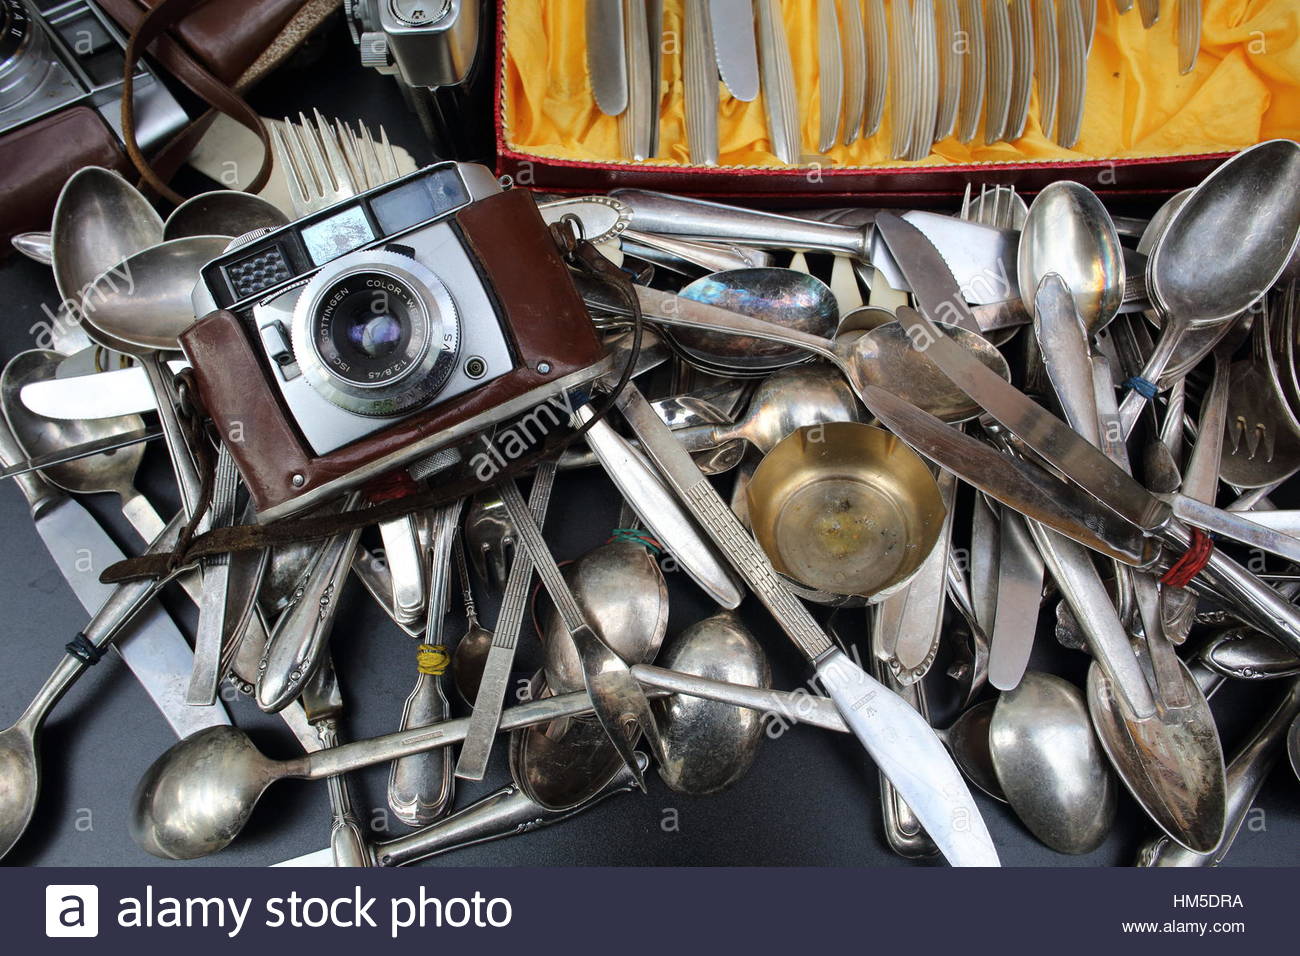 A camera and old silver spoons and knives all flung together in a second hand shop Stock Photo